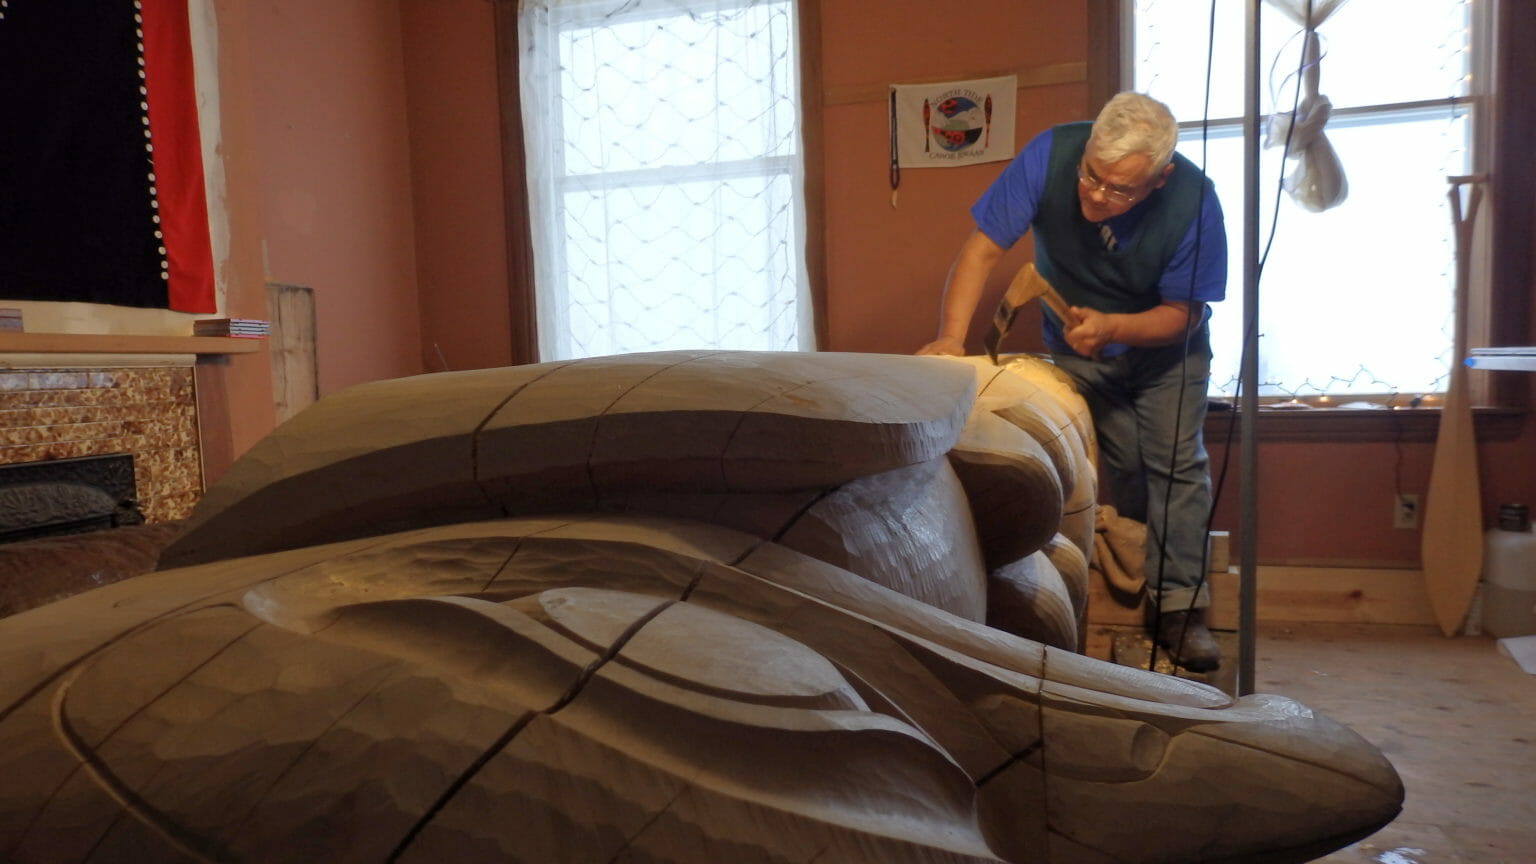 Master carver Wayne Price is back at the UAS teaching carving and formline